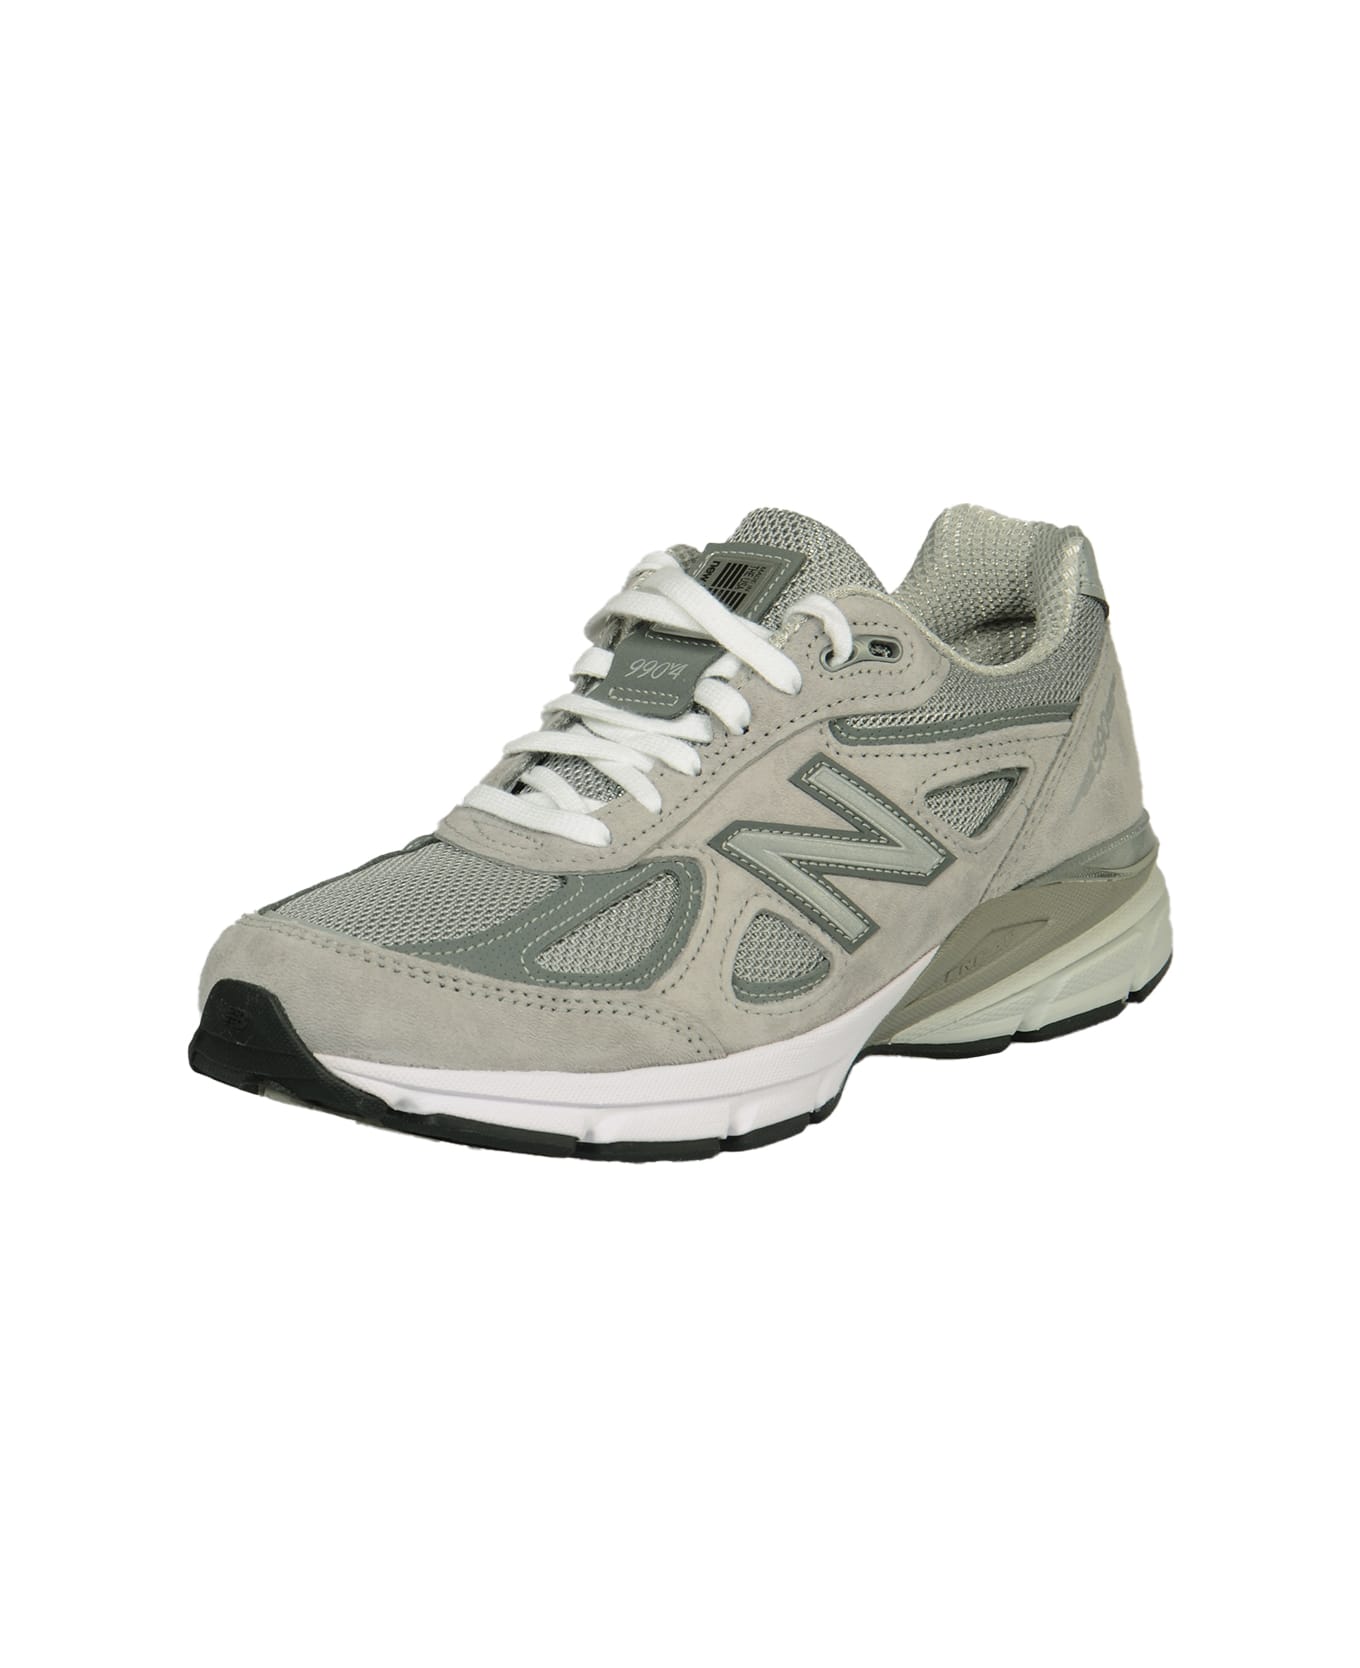 New Balance Logo Sided Sneakers